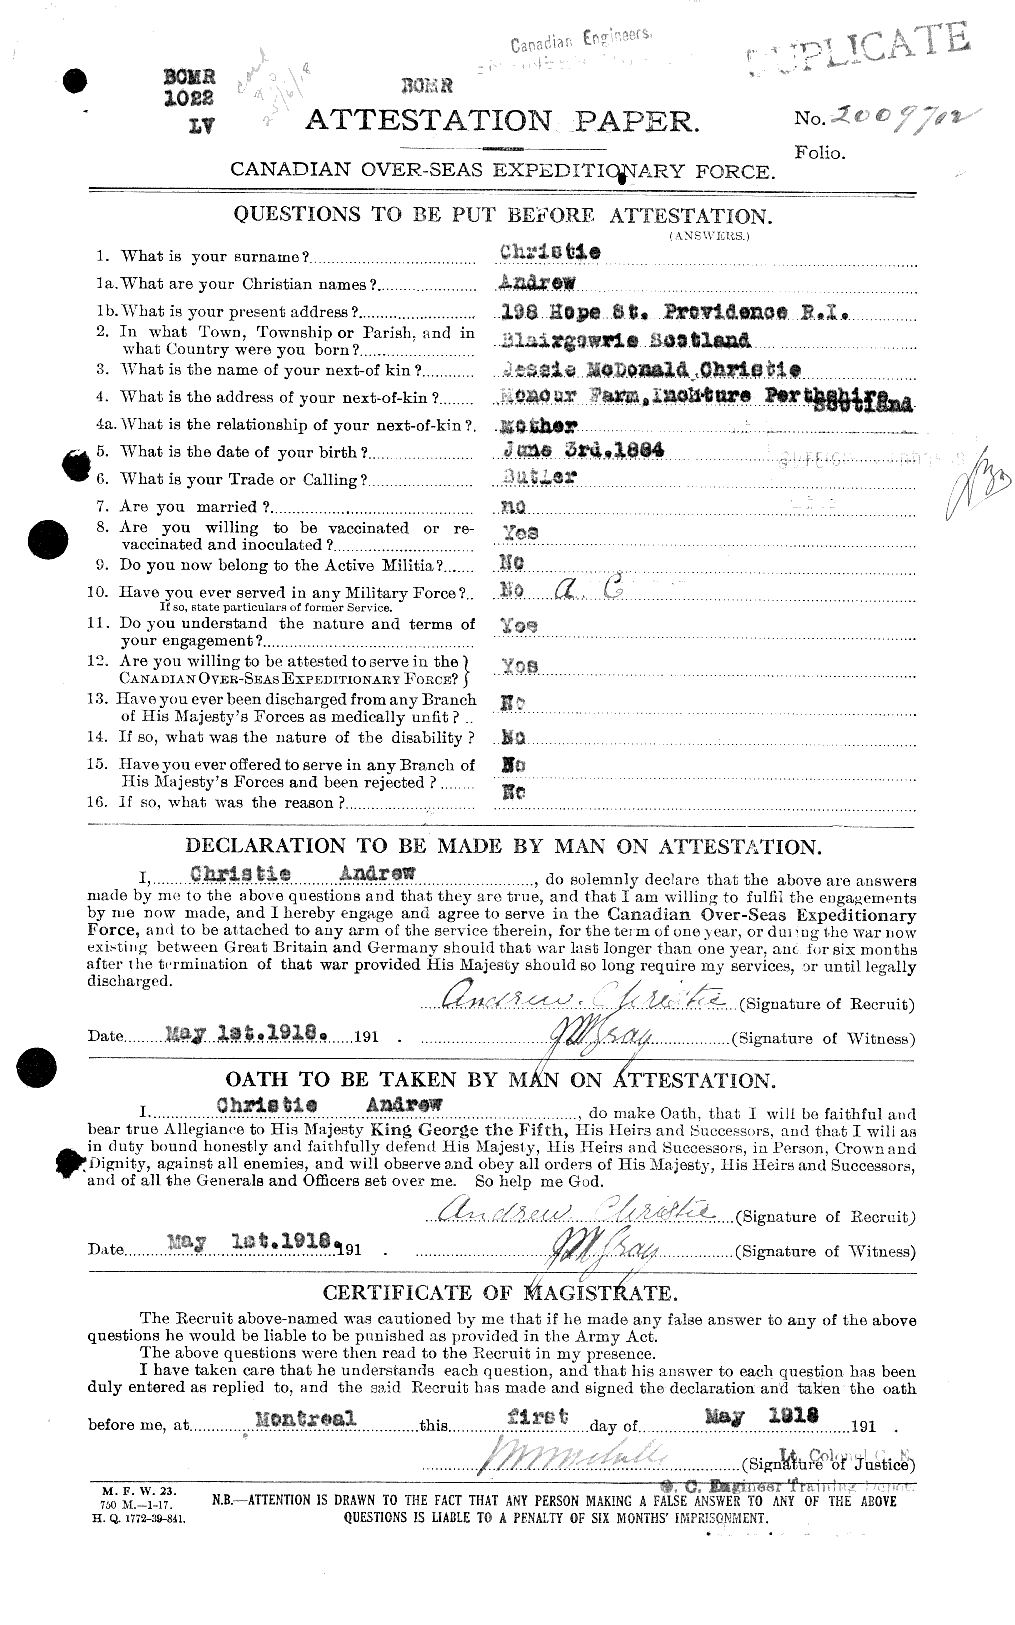 Personnel Records of the First World War - CEF 021873a